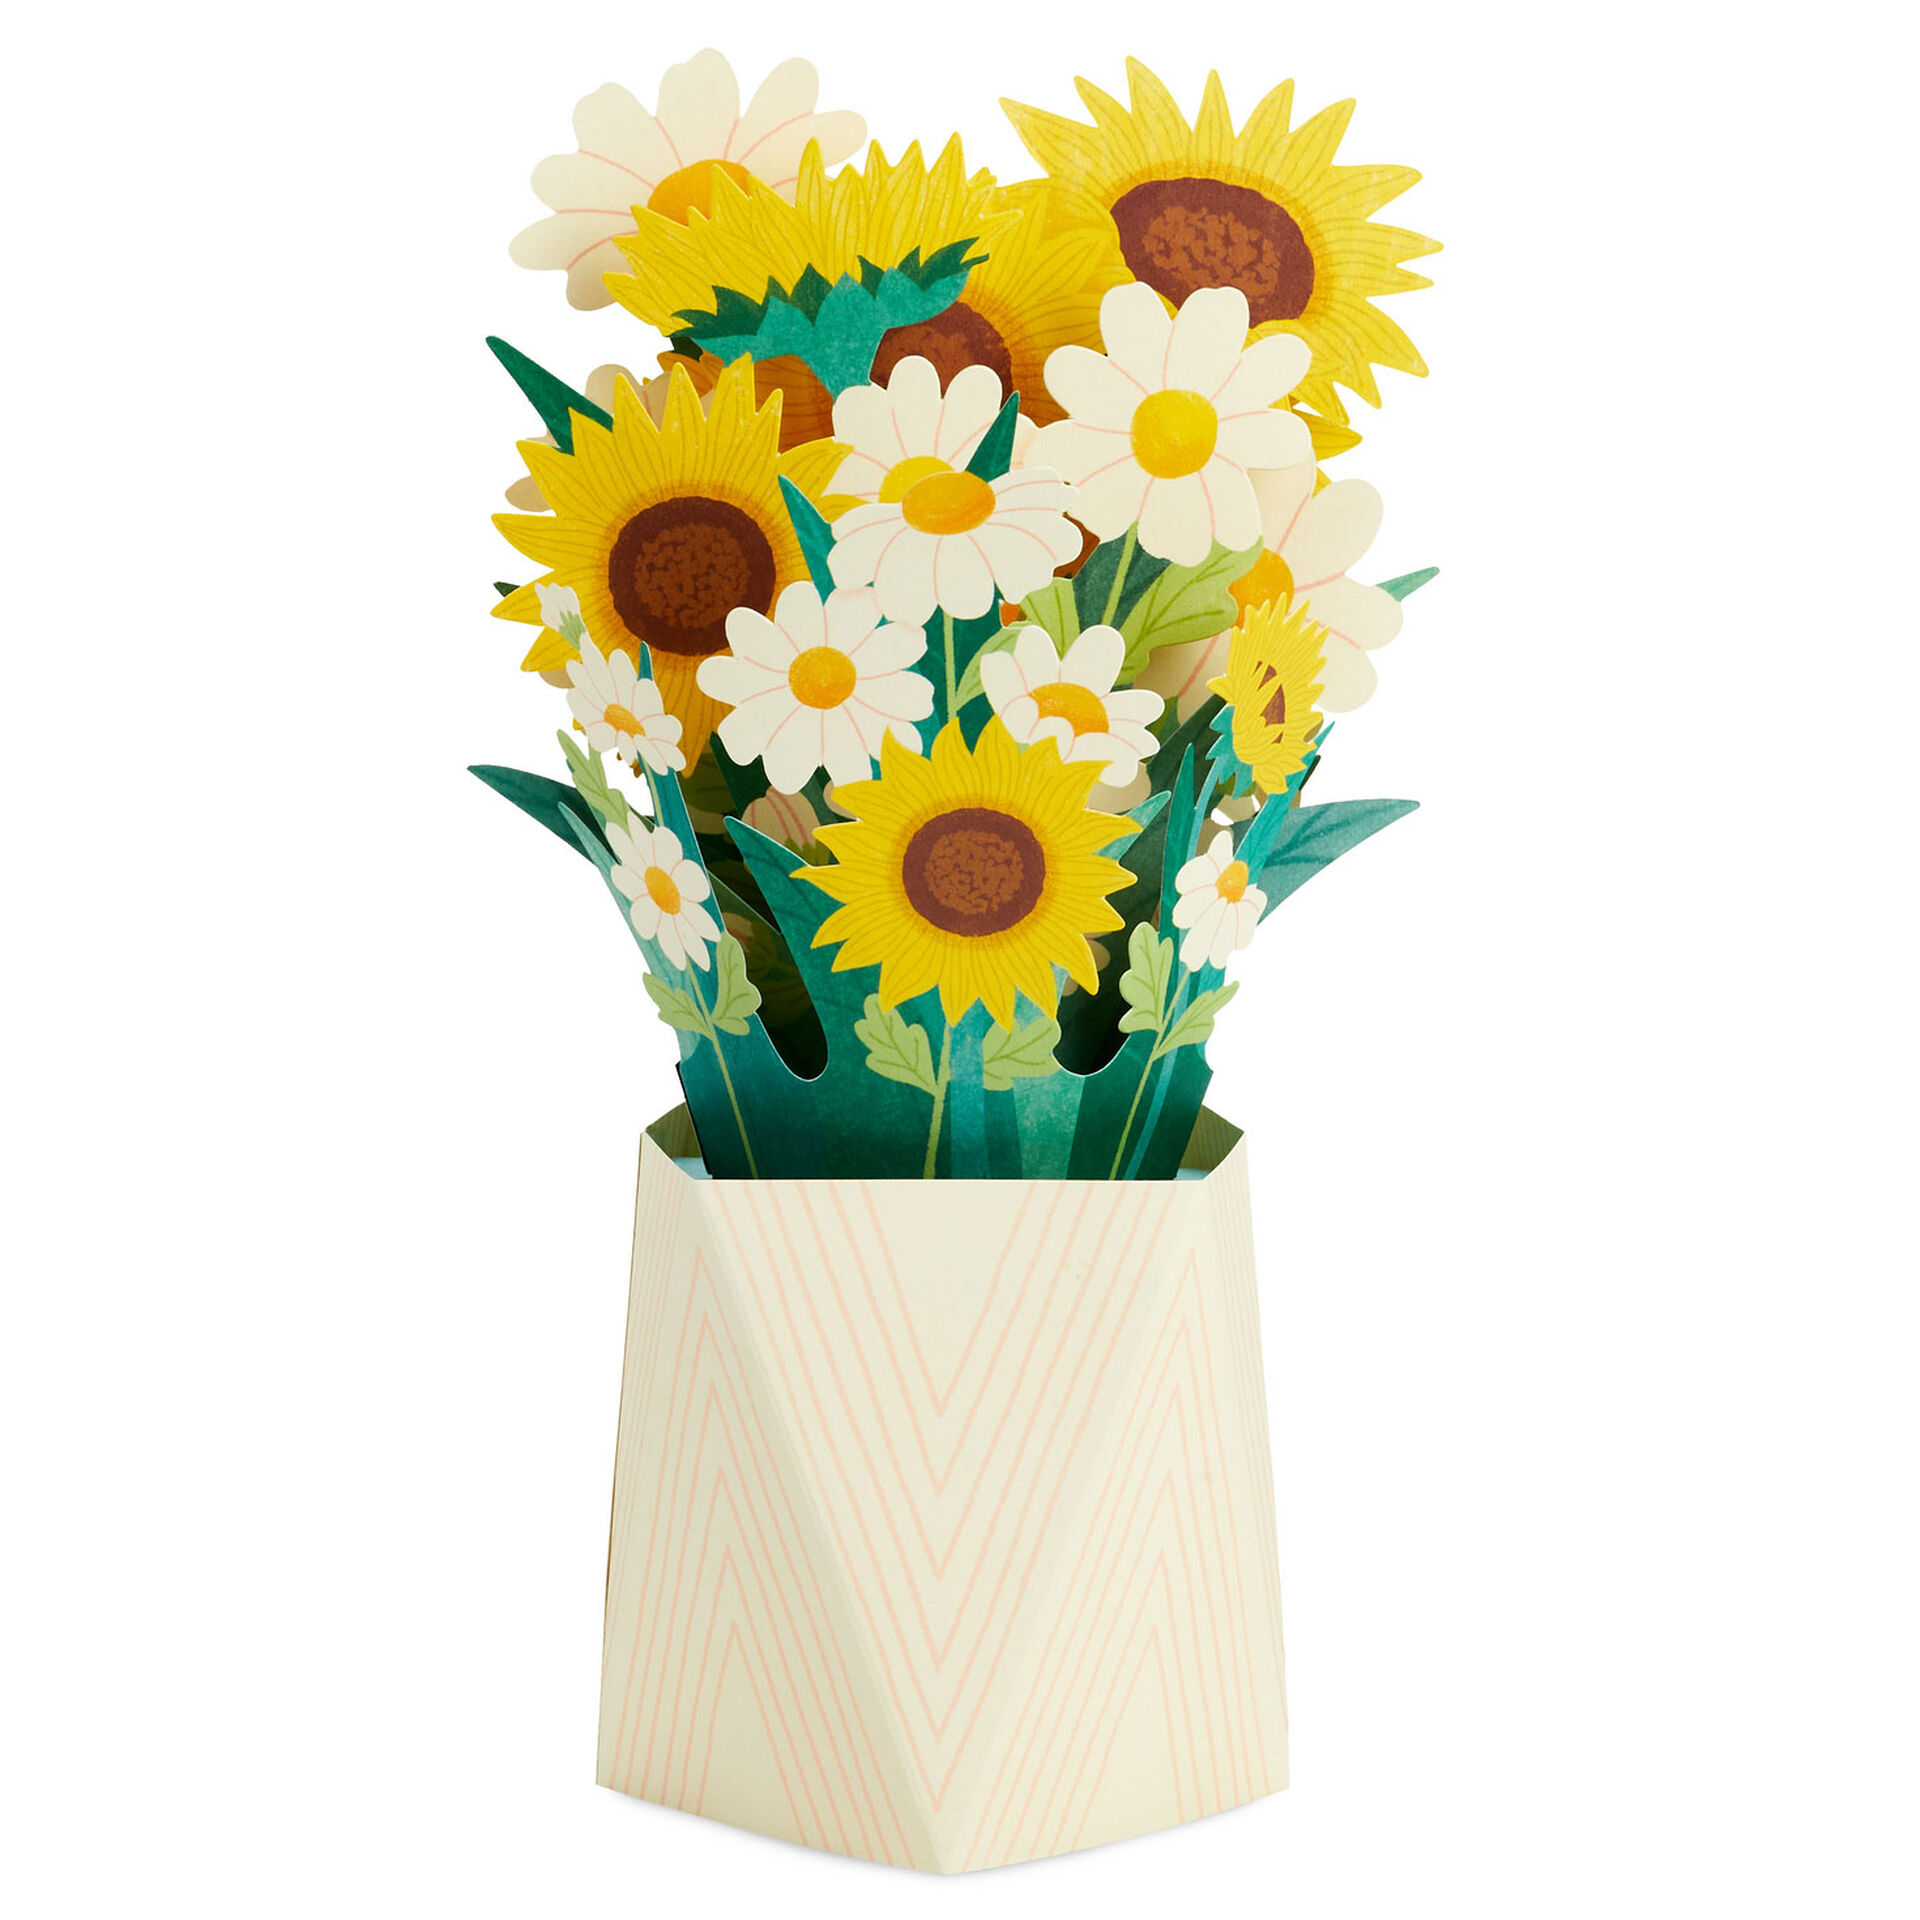 Daisy-&-Sunflower-Bouquet-Thinking-of-You-3D-PopUp-Card_799WDR1231_02